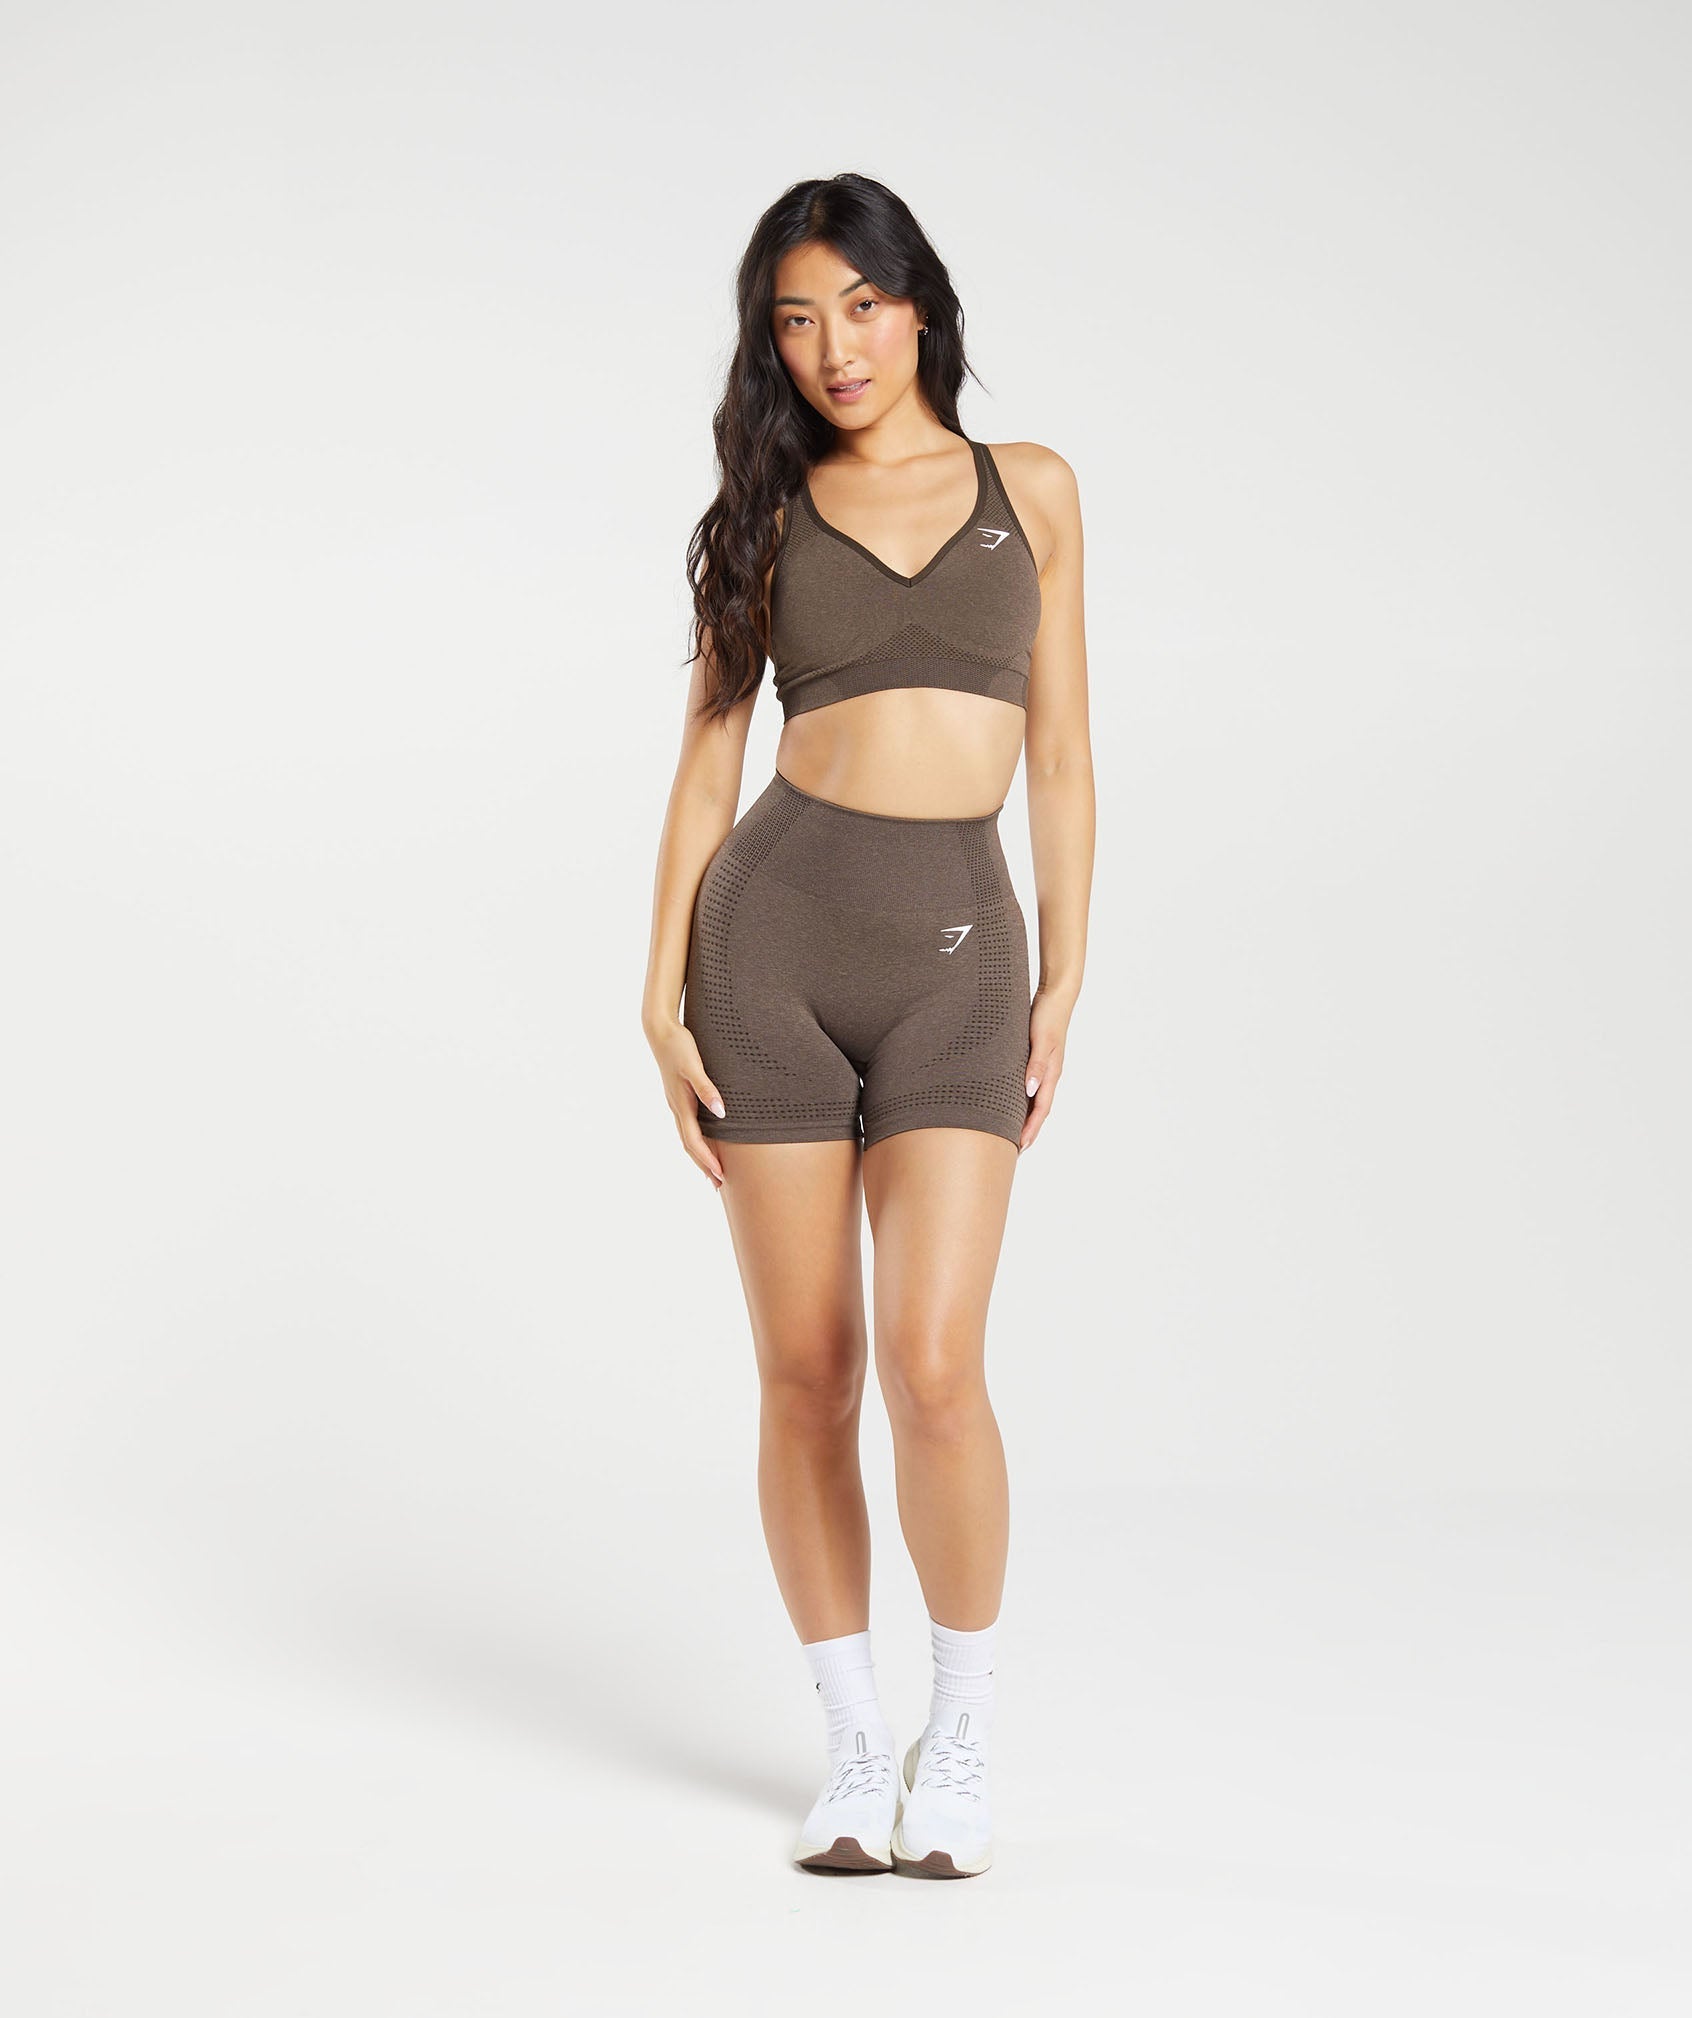 Vital Seamless 2.0 Shorts in Brown Marl - view 4